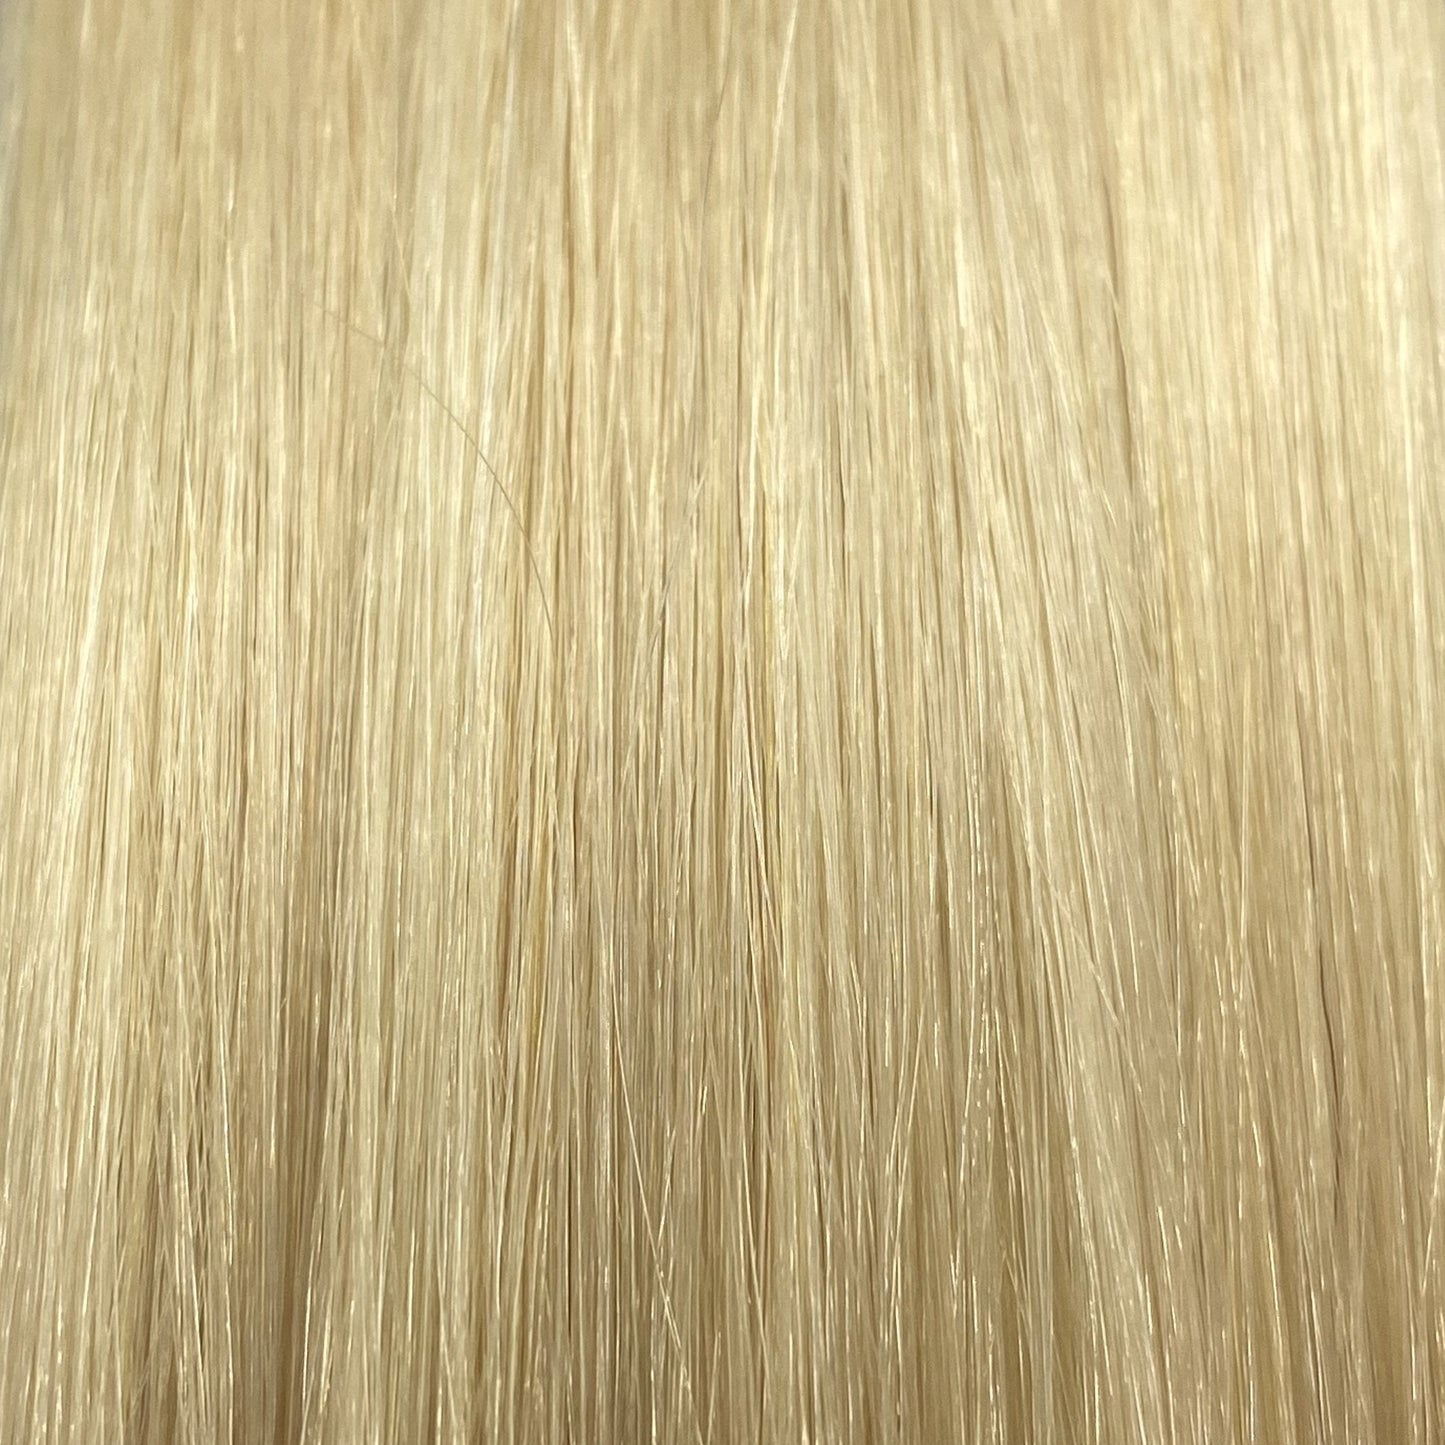 Fusion hair extensions #1002 - 24in - Very Light Ash Blonde Fusion Euro So Cap 